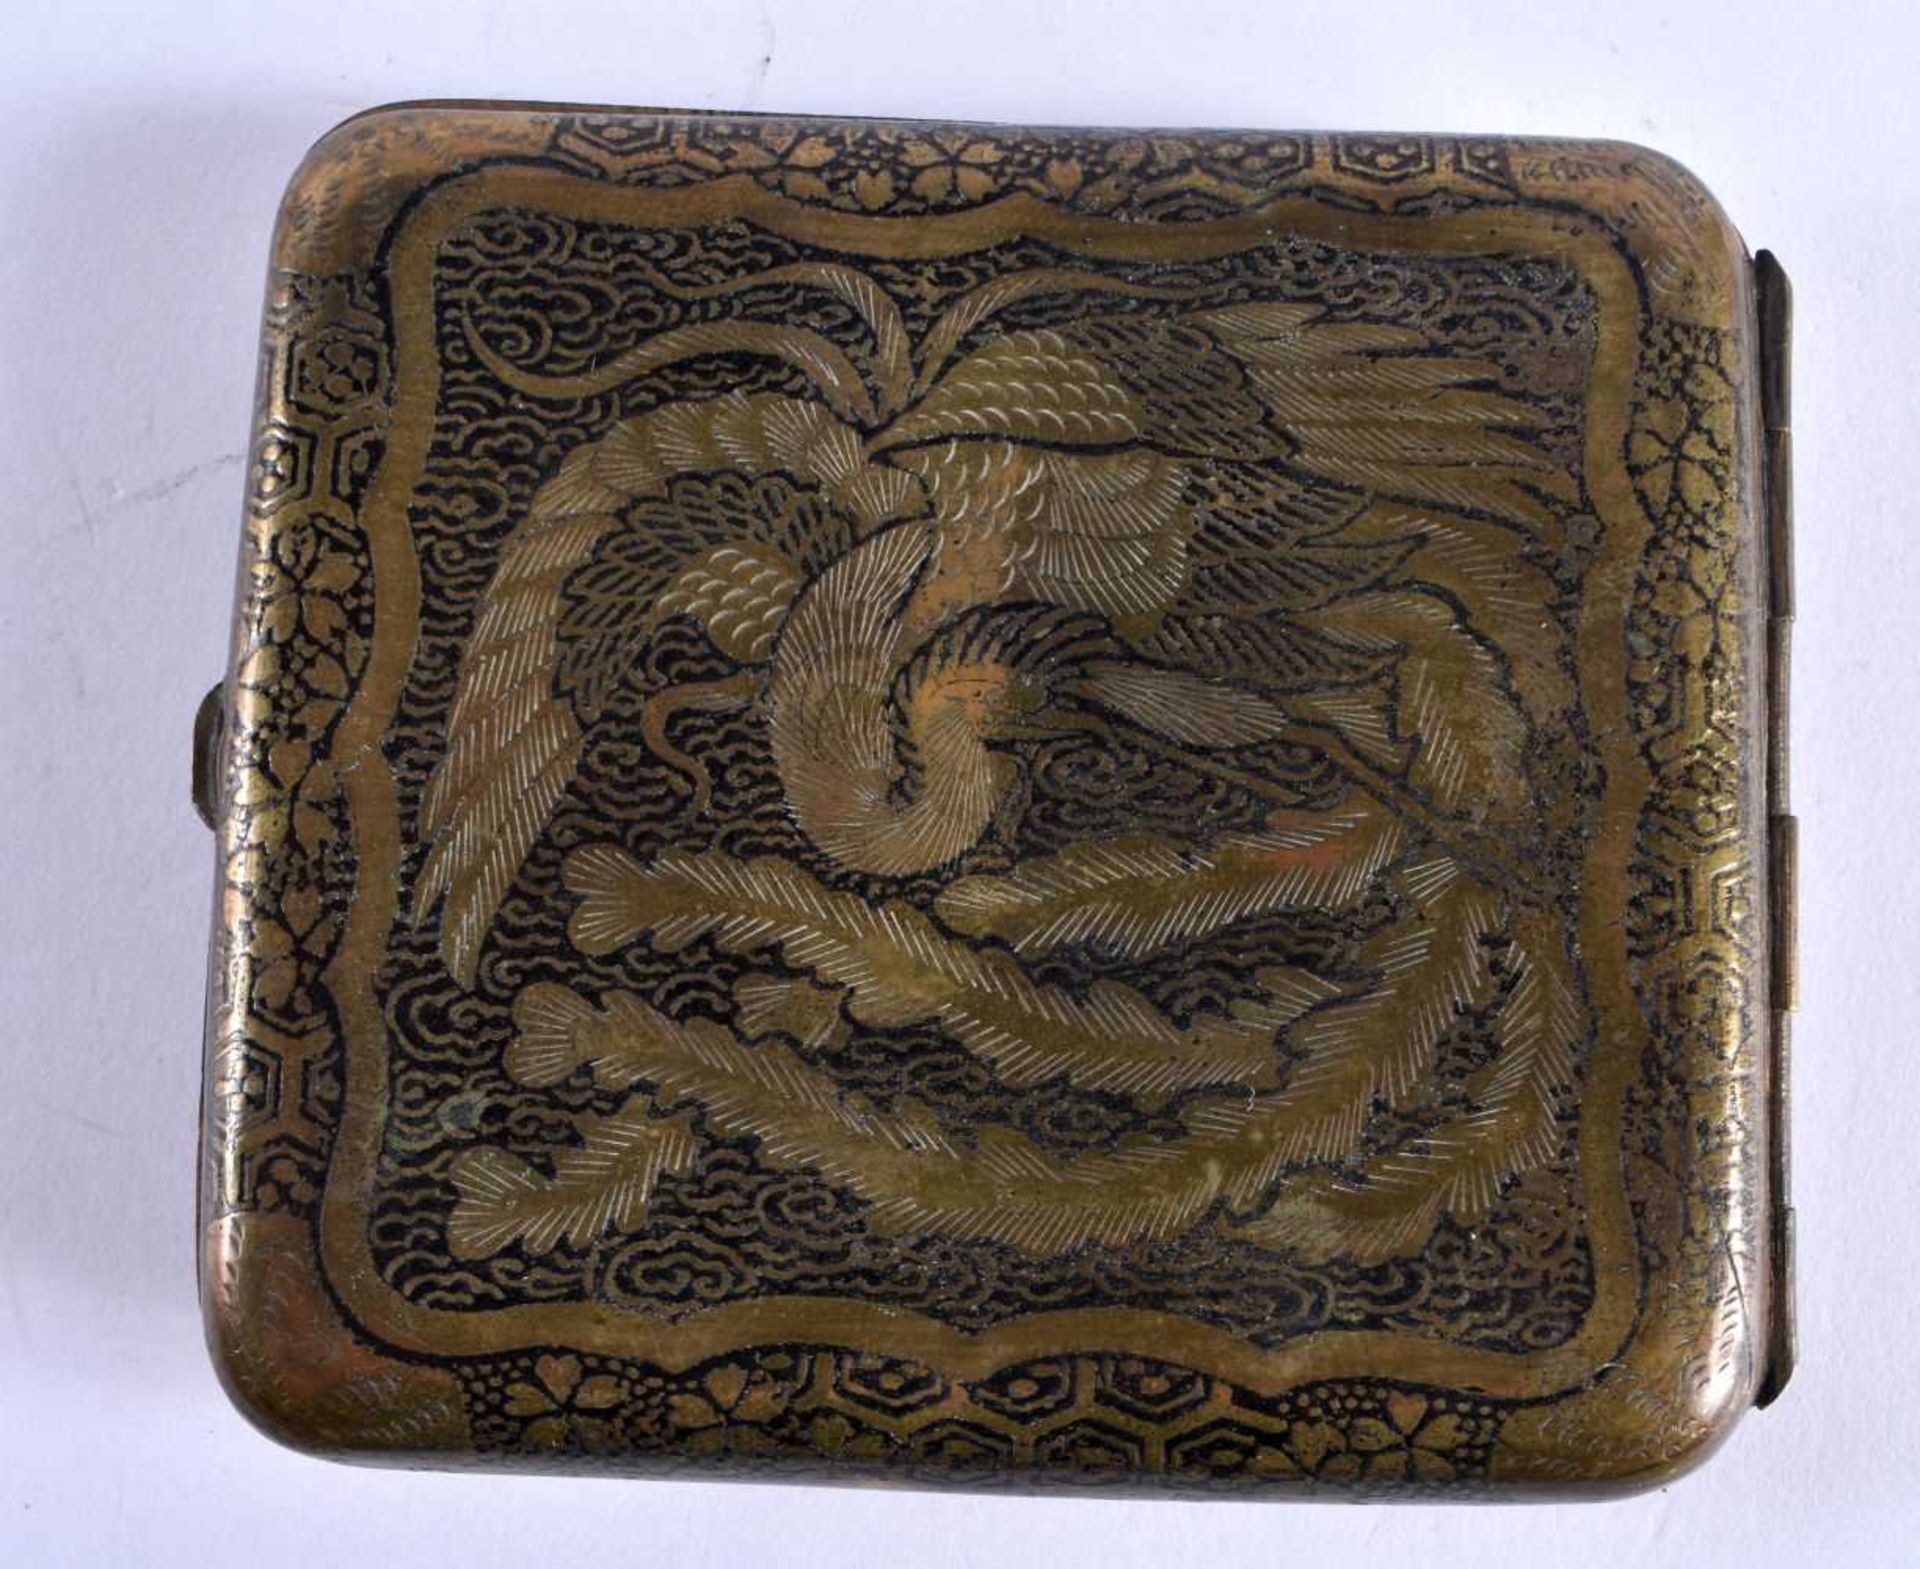 A LATE 19TH CENTURY JAPANESE MEIJI PERIOD KOMAI STYLE CASE. 84.4 grams. 9 cm square. - Image 3 of 3